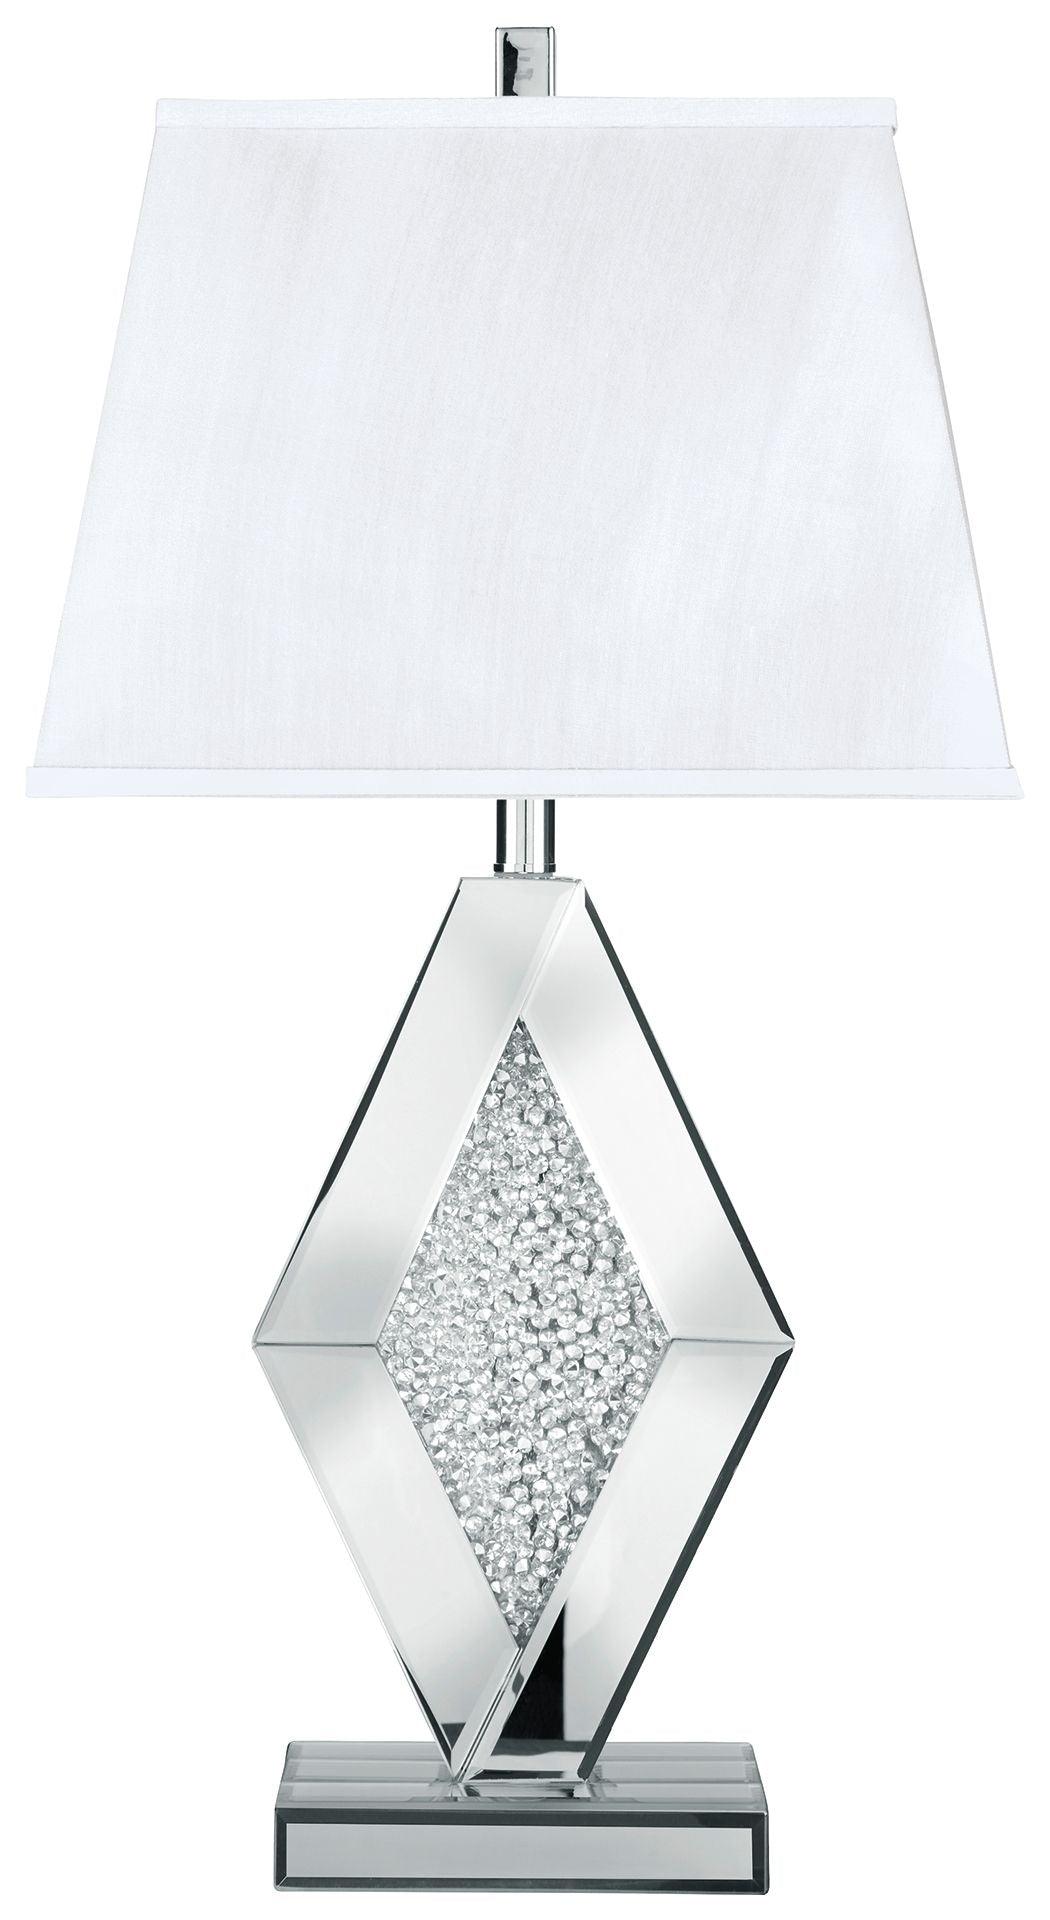 Prunella - Silver Finish - Mirror Table Lamp Tony's Home Furnishings Furniture. Beds. Dressers. Sofas.